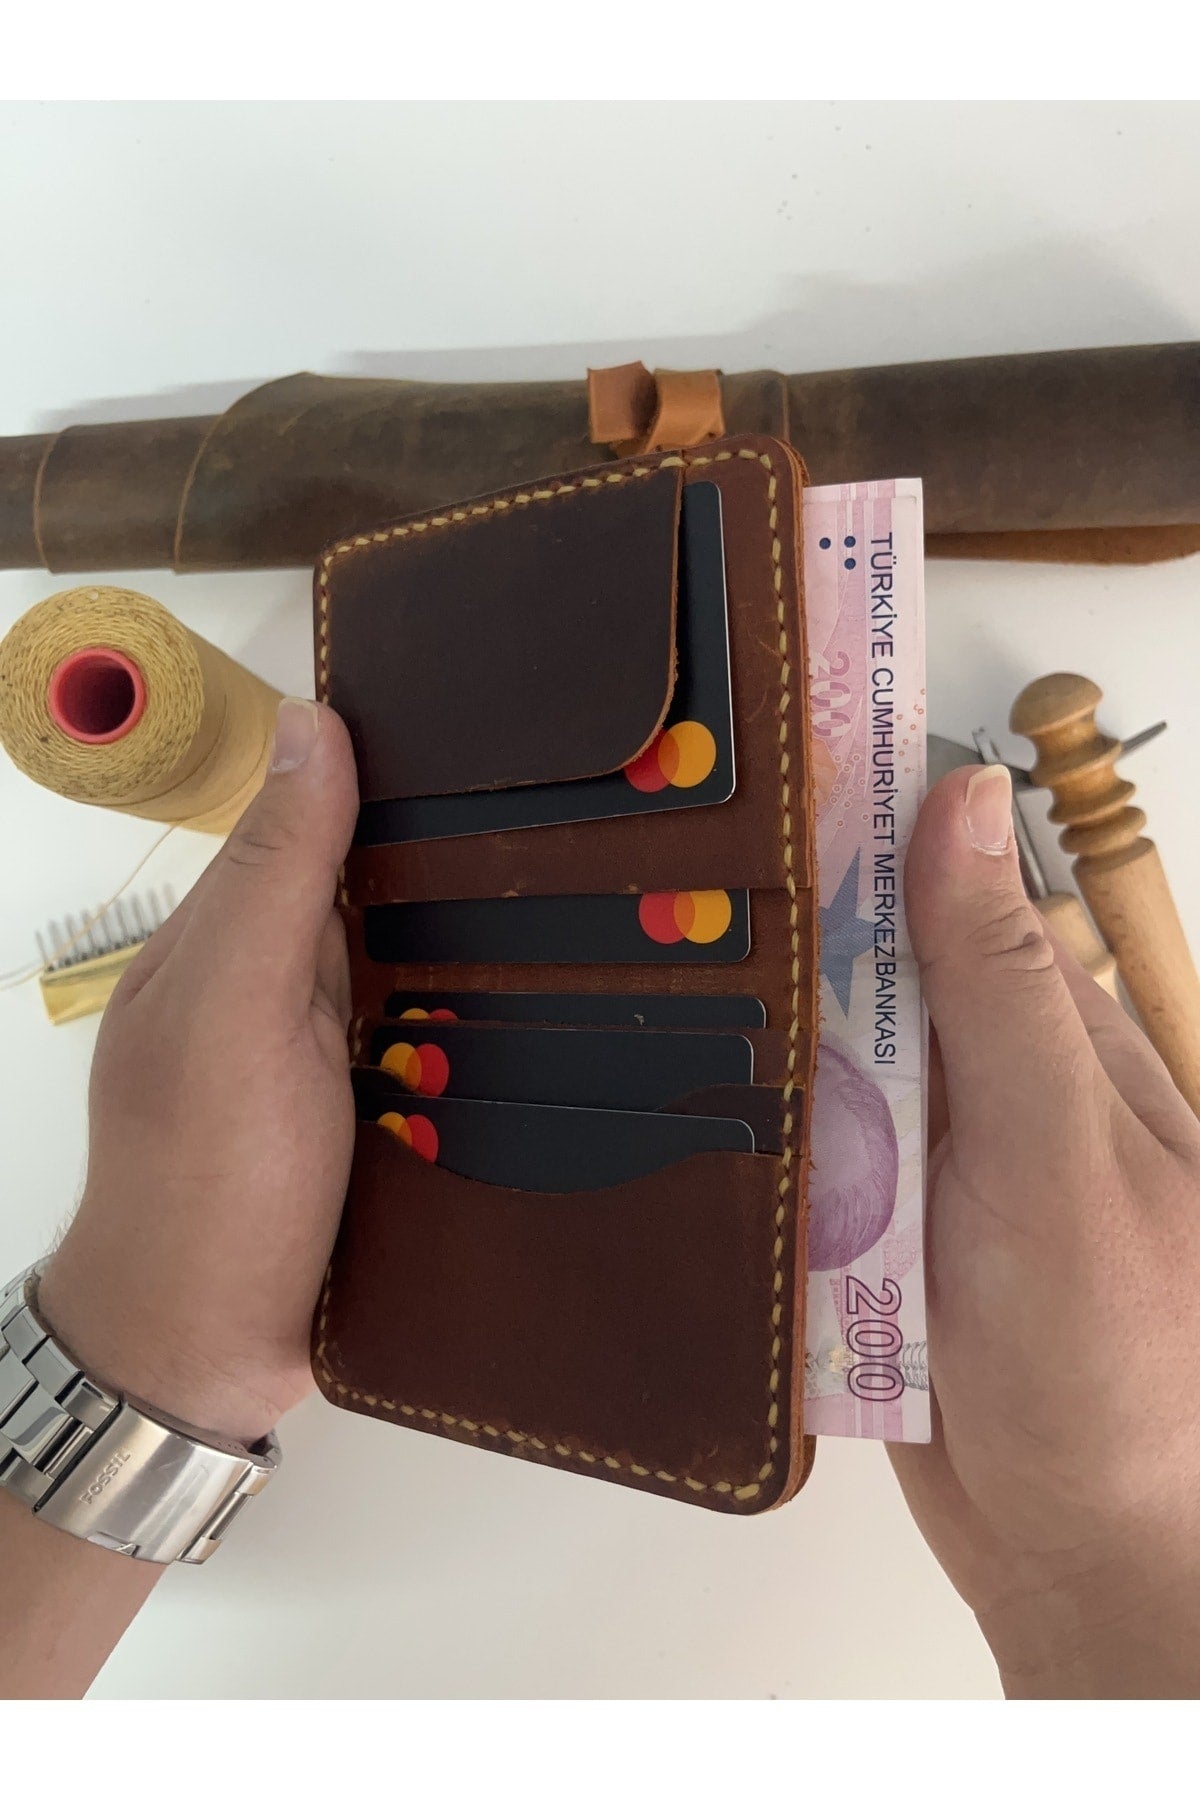 Genuine Leather Wallet With Card And Cash Compartment - Personalized Name Printing (KEY RING GIFT)